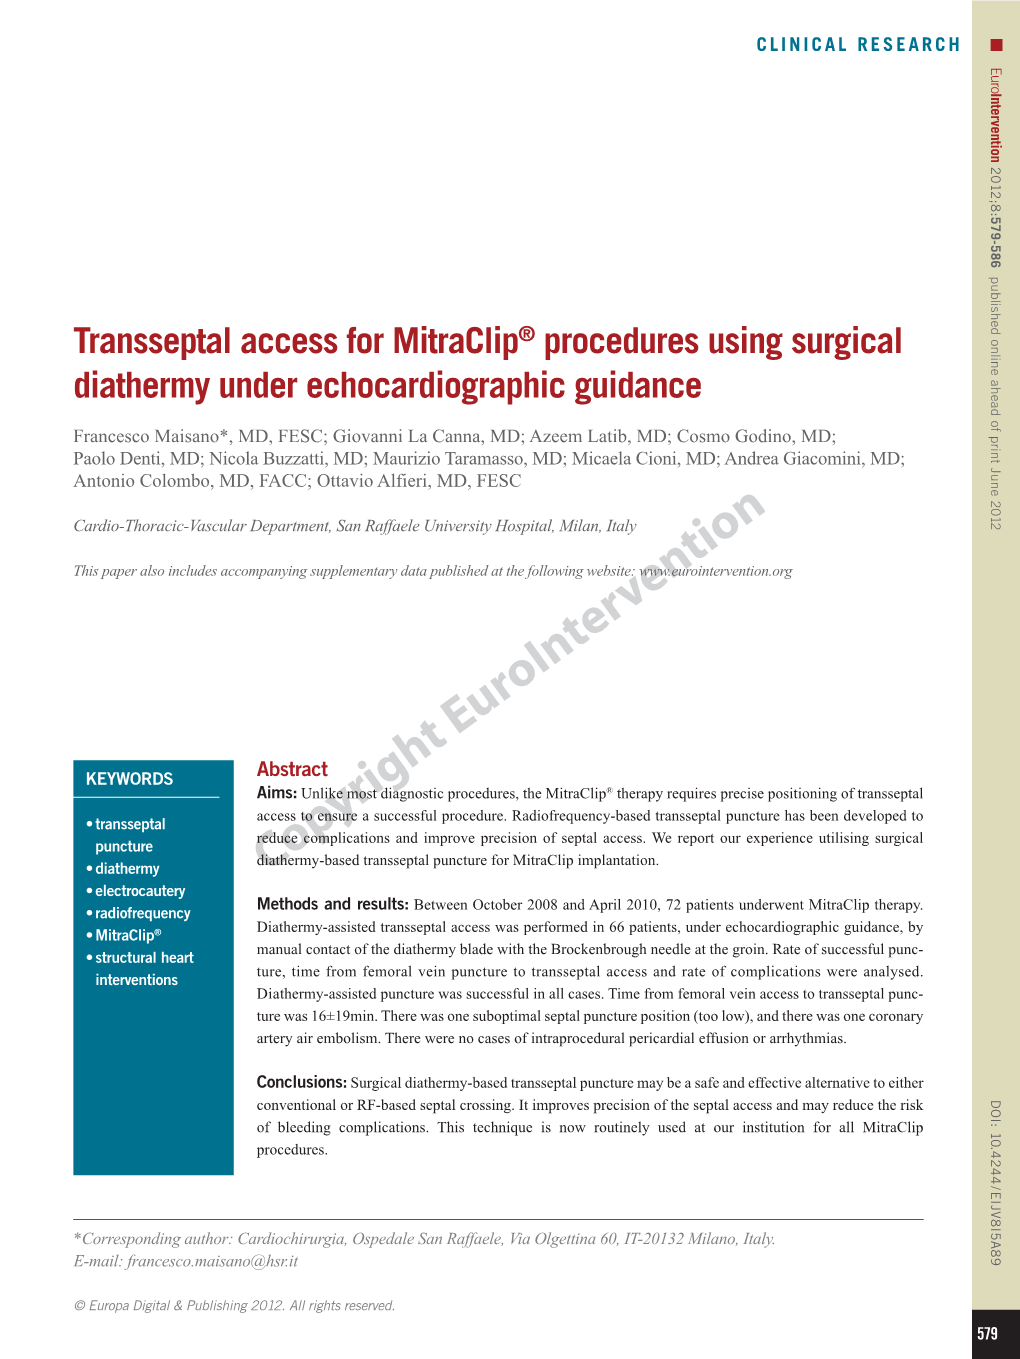 Transseptal Access for Mitraclip® Procedures Using Surgical Diathermy Under Echocardiographic Guidance